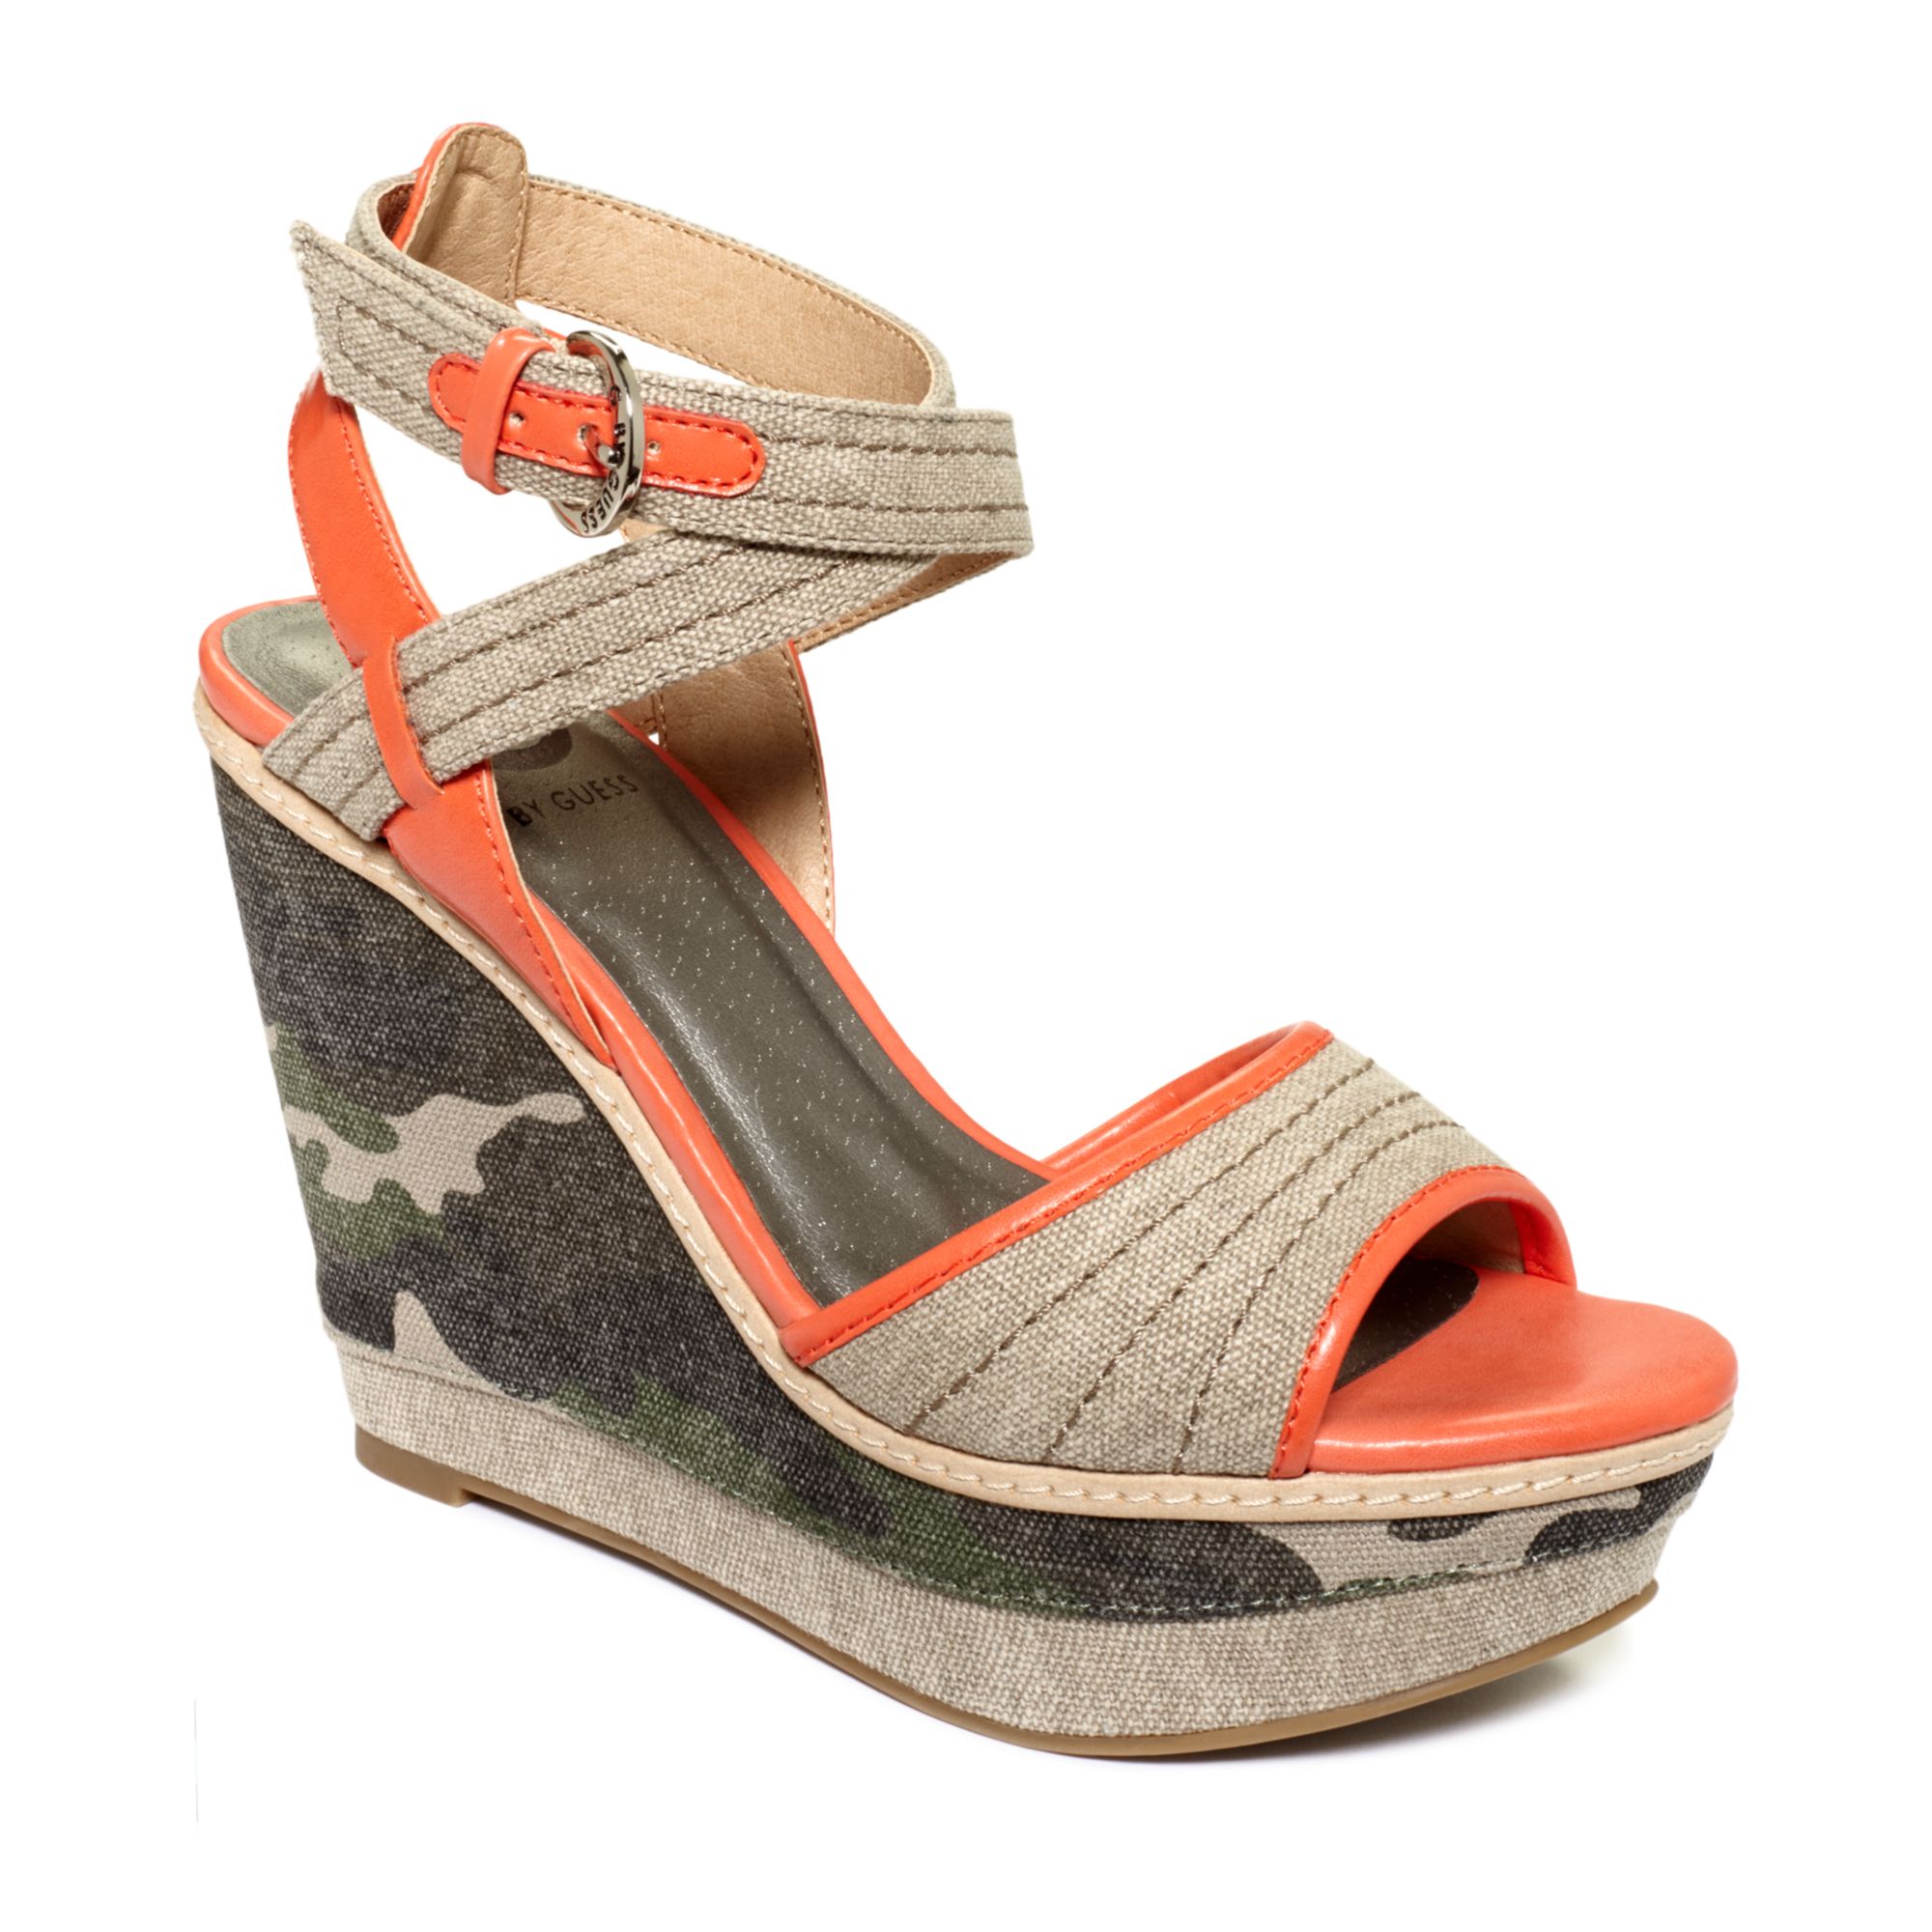 camouflage wedge sandals